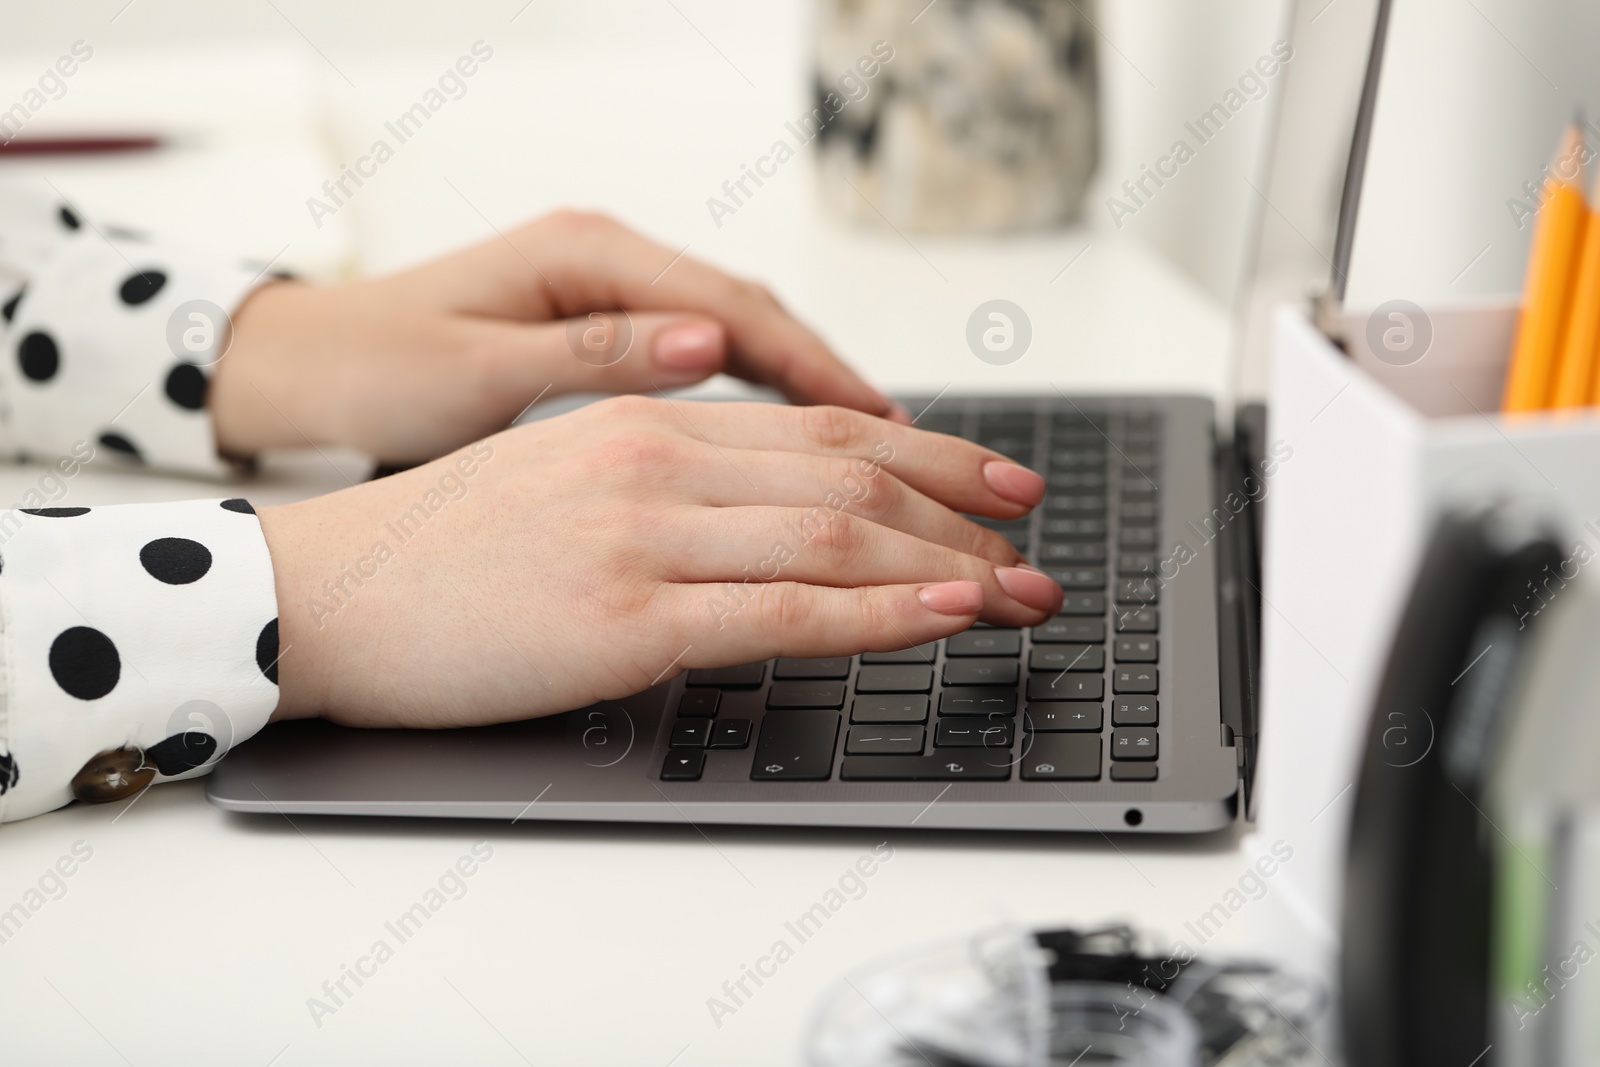 Photo of E-learning. Woman using laptop during online lesson at table indoors, closeup